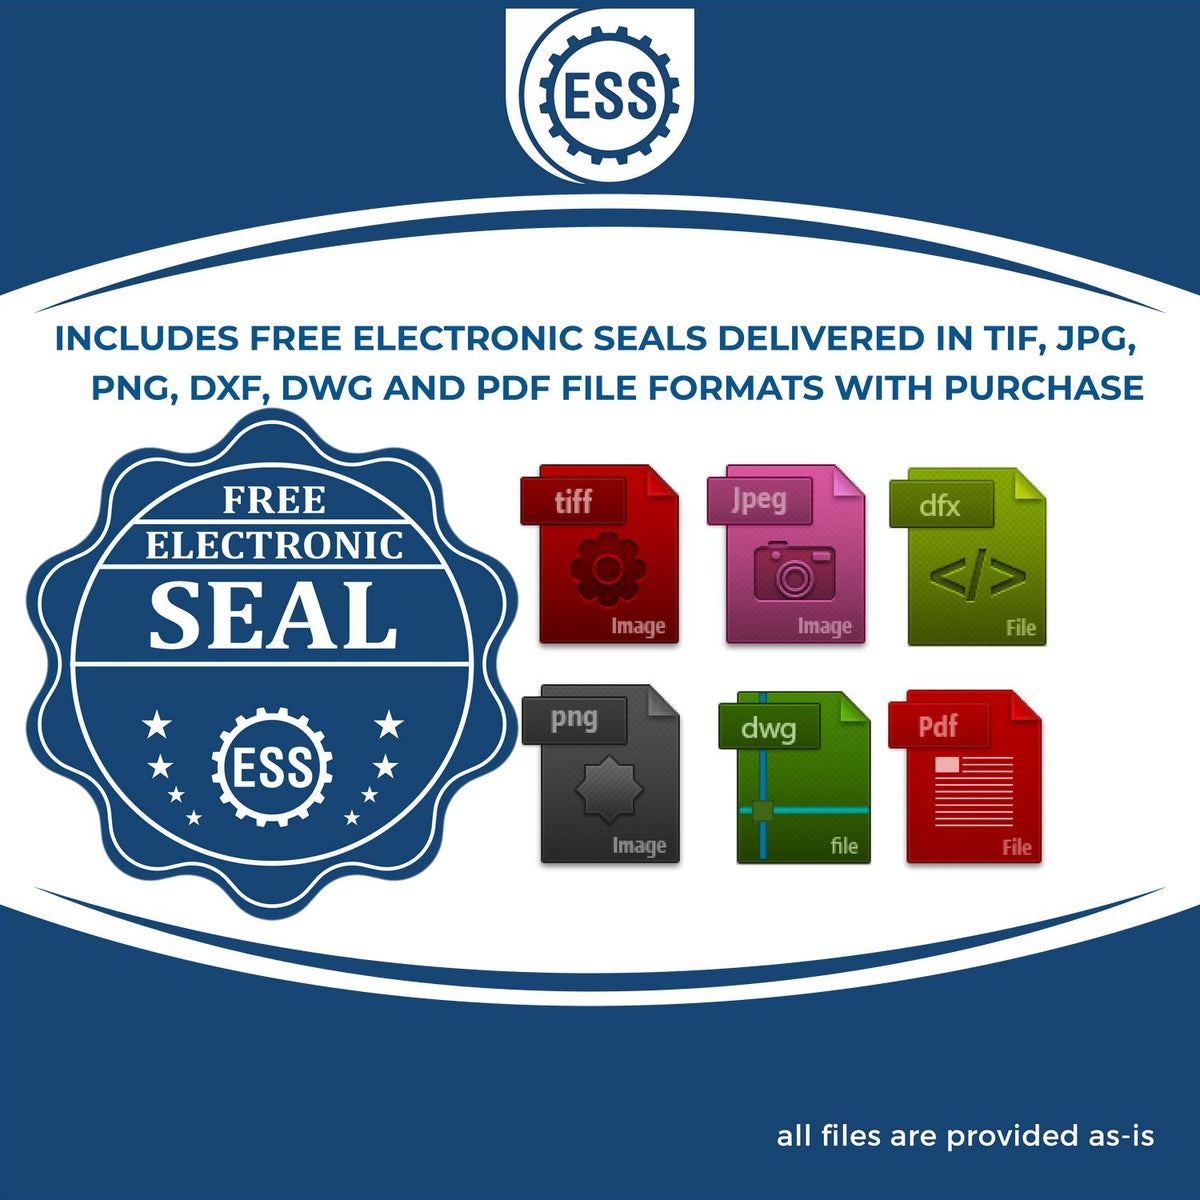 An infographic for the free electronic seal for the Premium MaxLight Pre-Inked Missouri Engineering Stamp illustrating the different file type icons such as DXF, DWG, TIF, JPG and PNG.